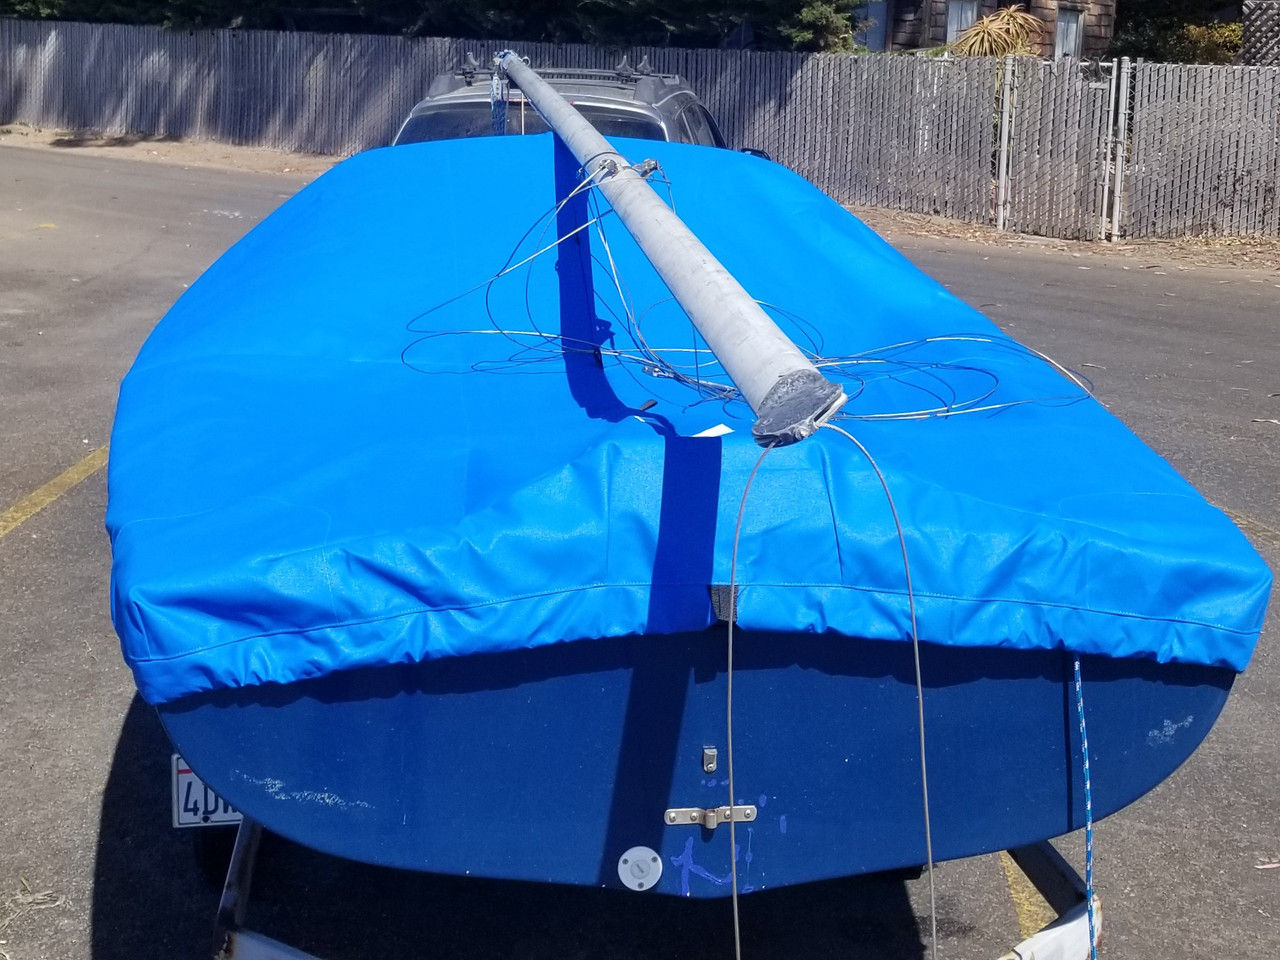 Web Loops allow you to “tent” your cover up to prevent pooling of water. 
